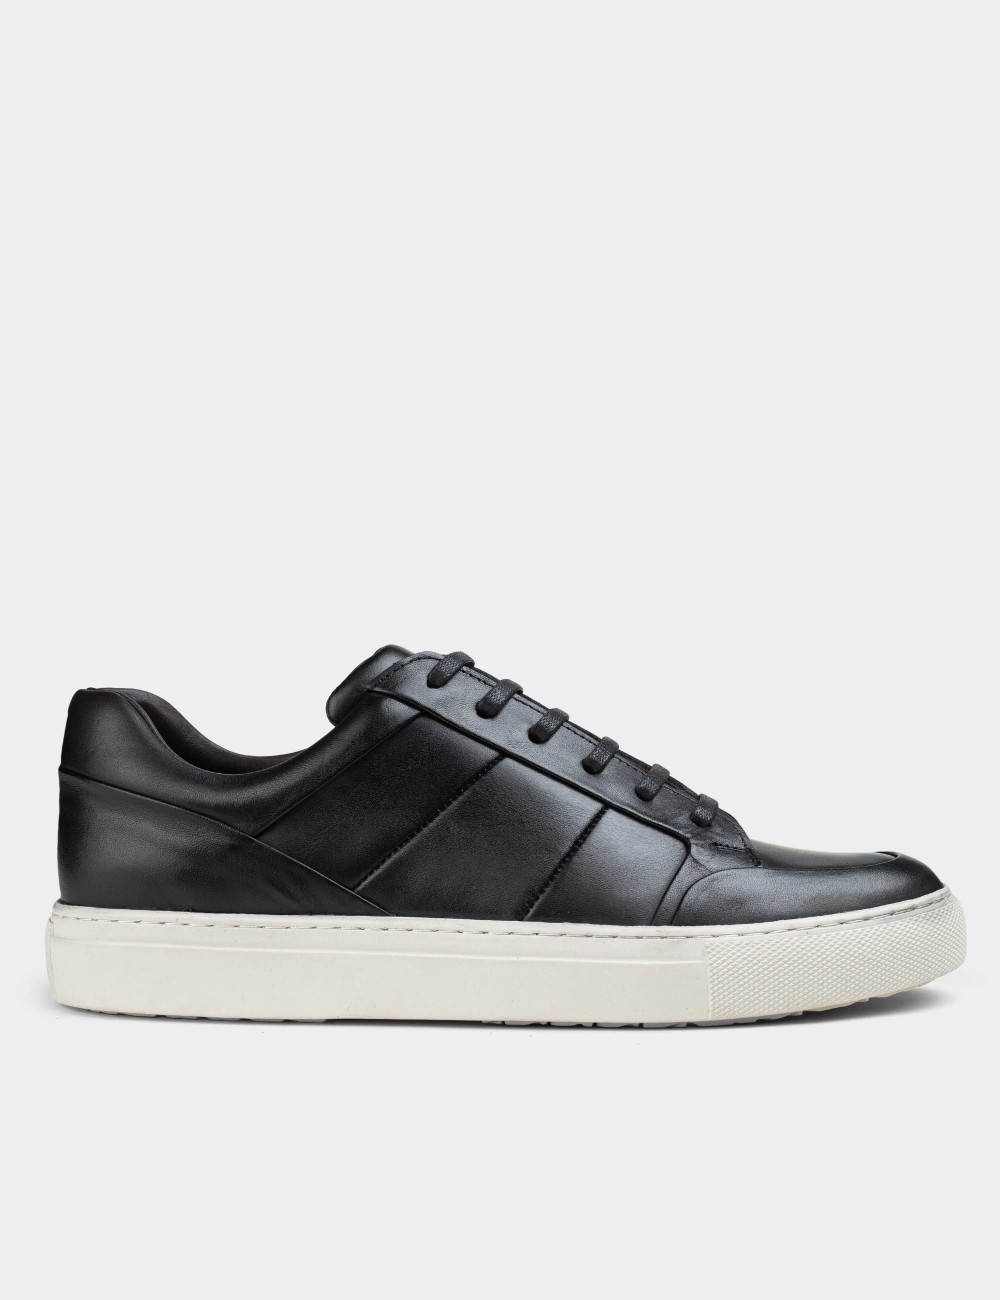 Black  Leather Sneakers - 01723MSYHC01